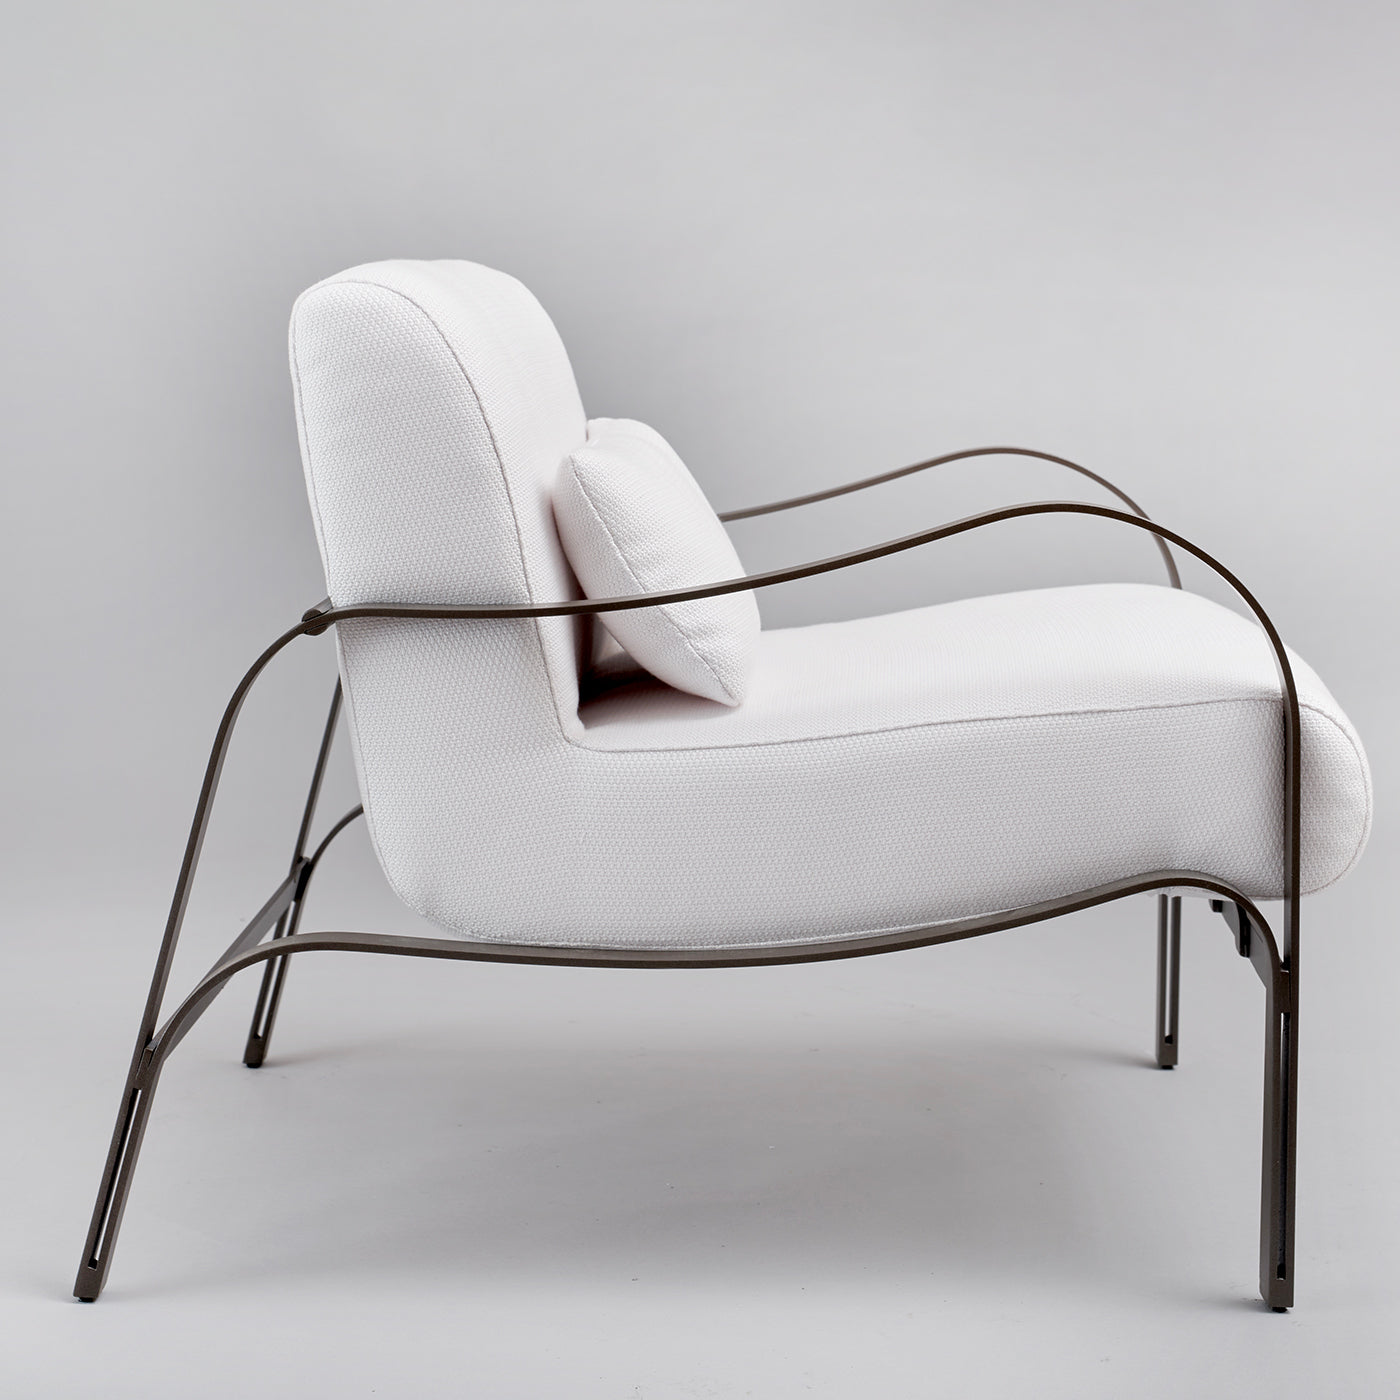 Amalfi White and Gray Armchair by Studio 63 in Stainless Steel - Alternative view 1